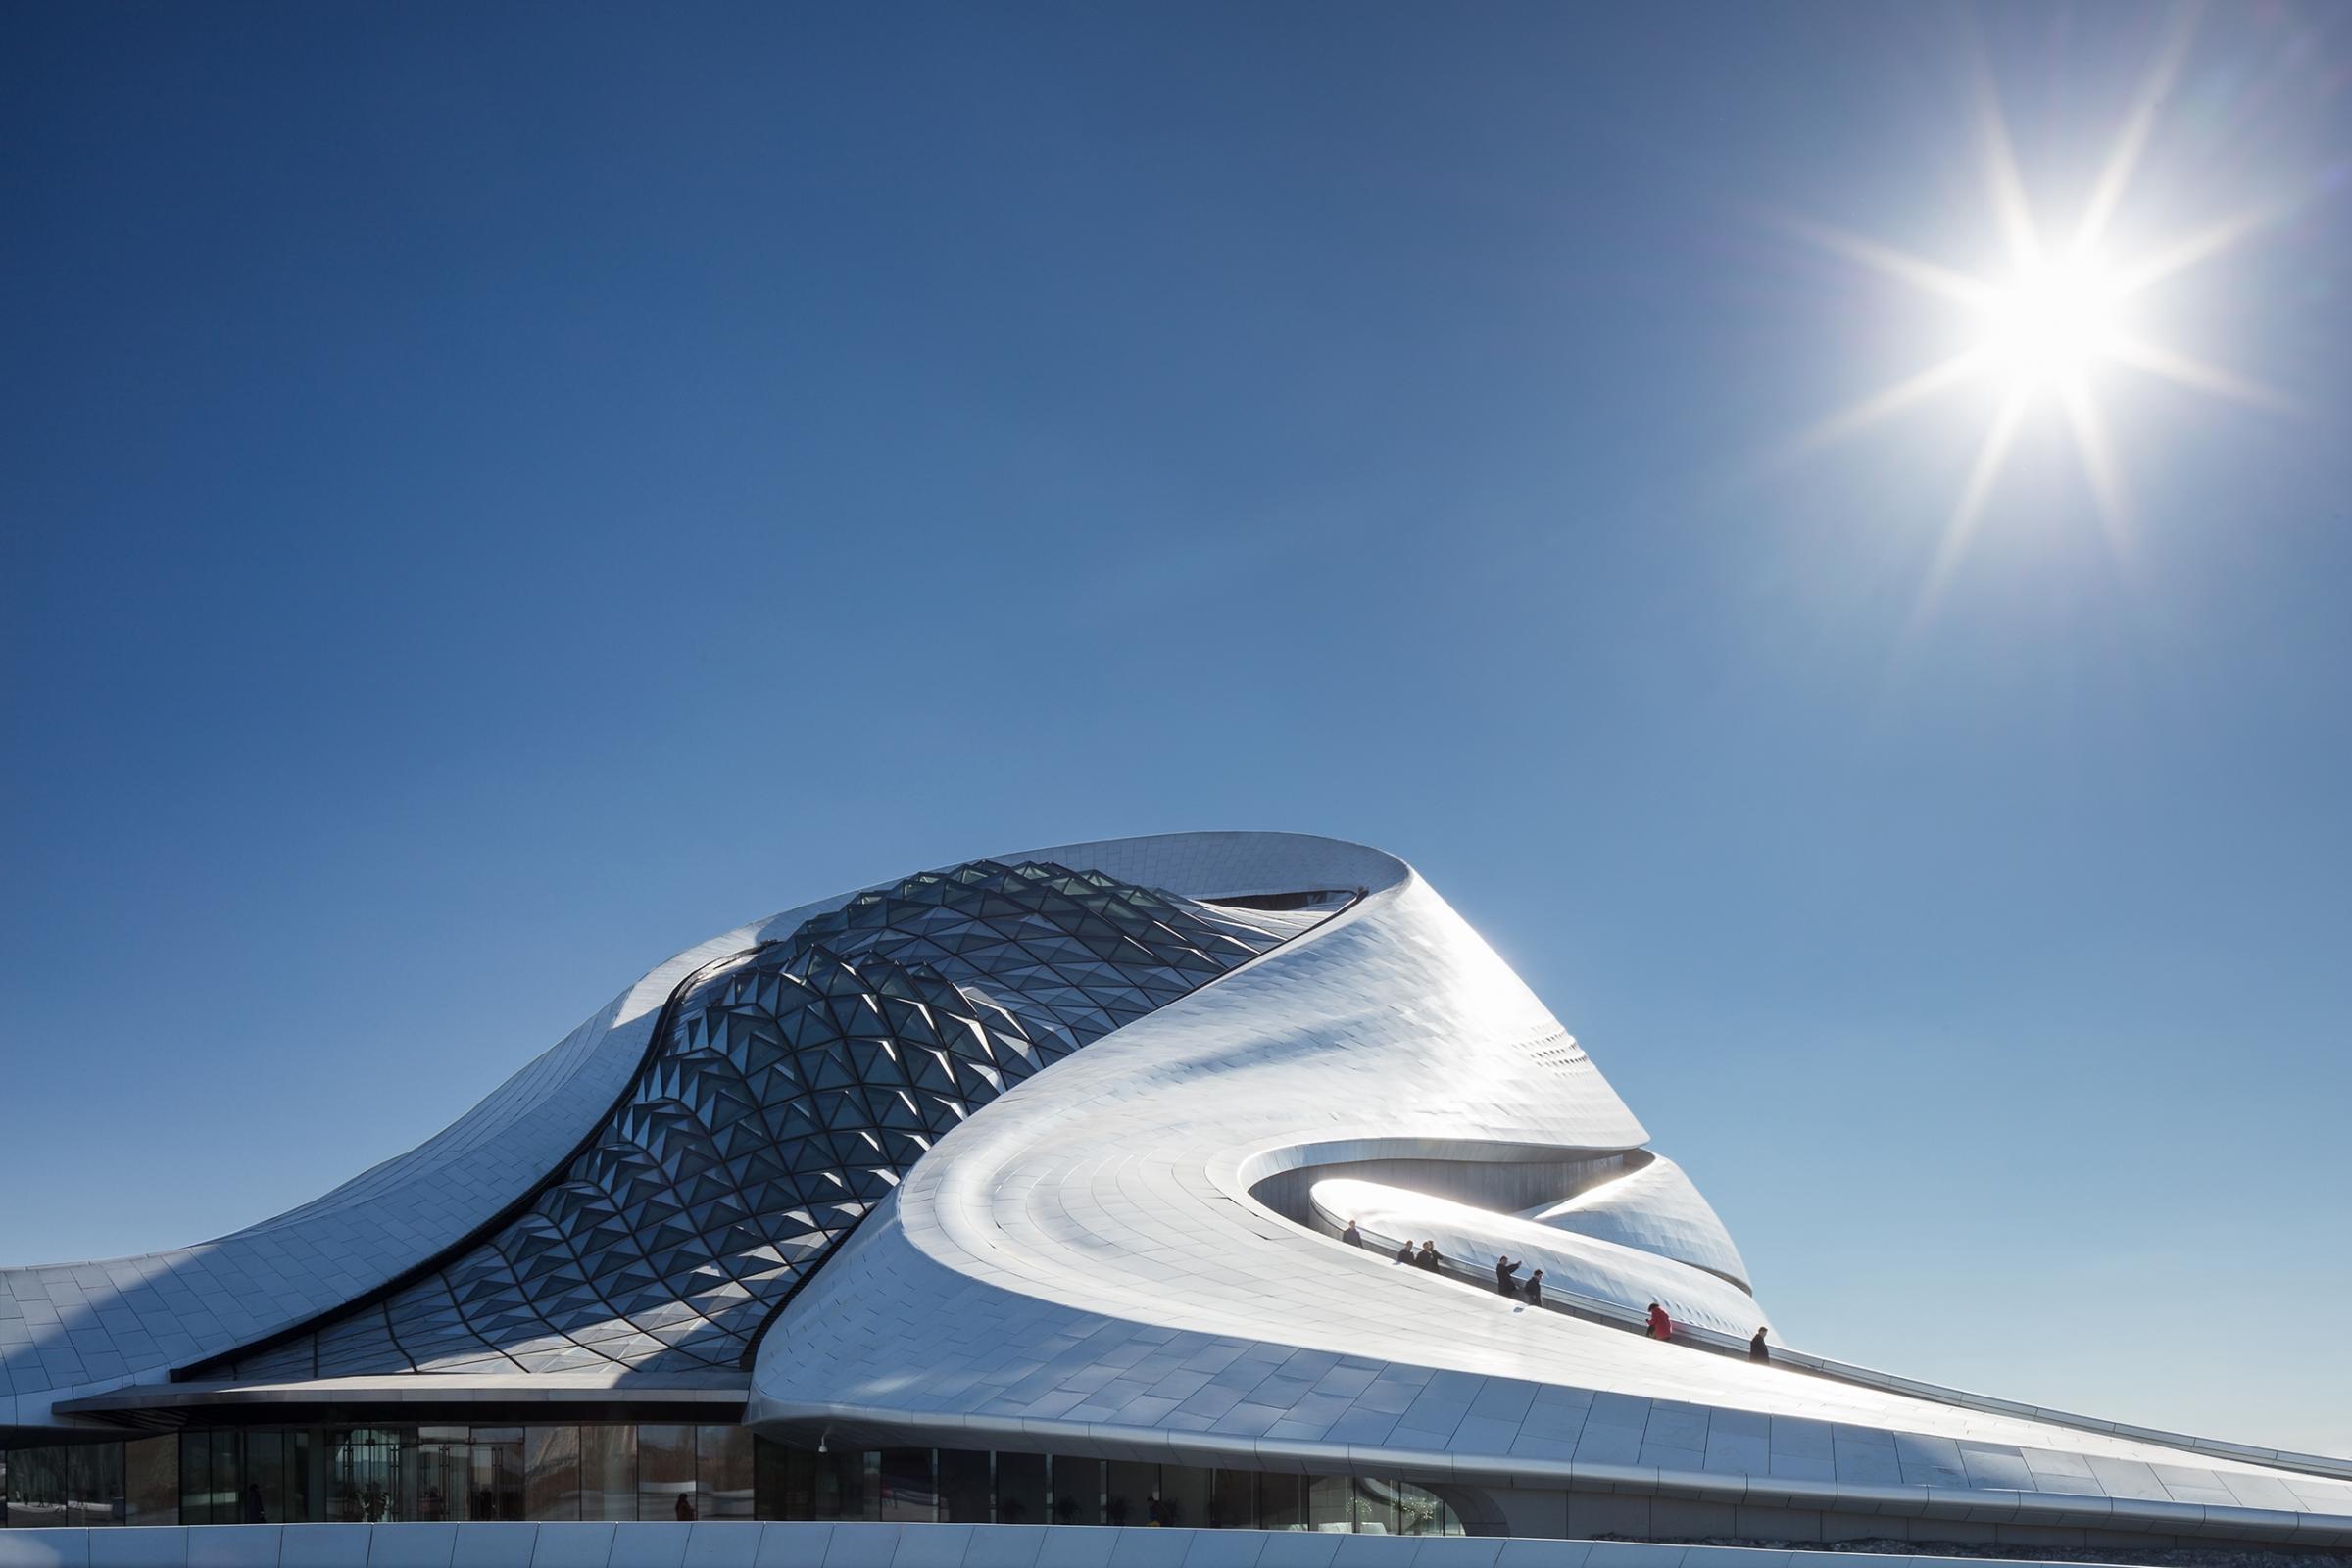 Photograph of Harbin Opera House, designed by MAD Architects and located in Harbin, China